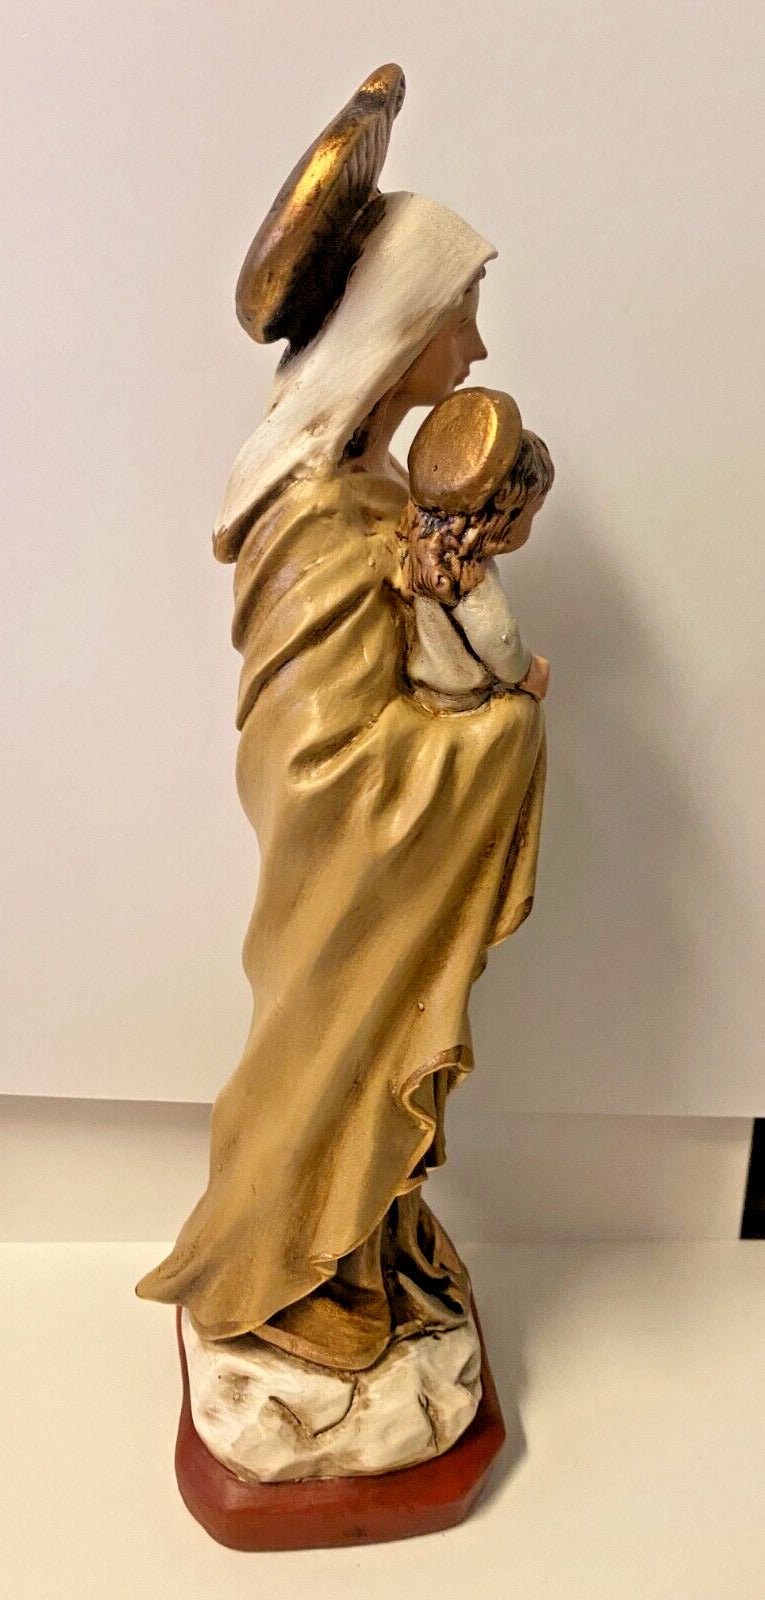 Our Lady Mary Star of the Sea Hand Painted 10.5" Statue, New From Colombia #L013 - Bob and Penny Lord